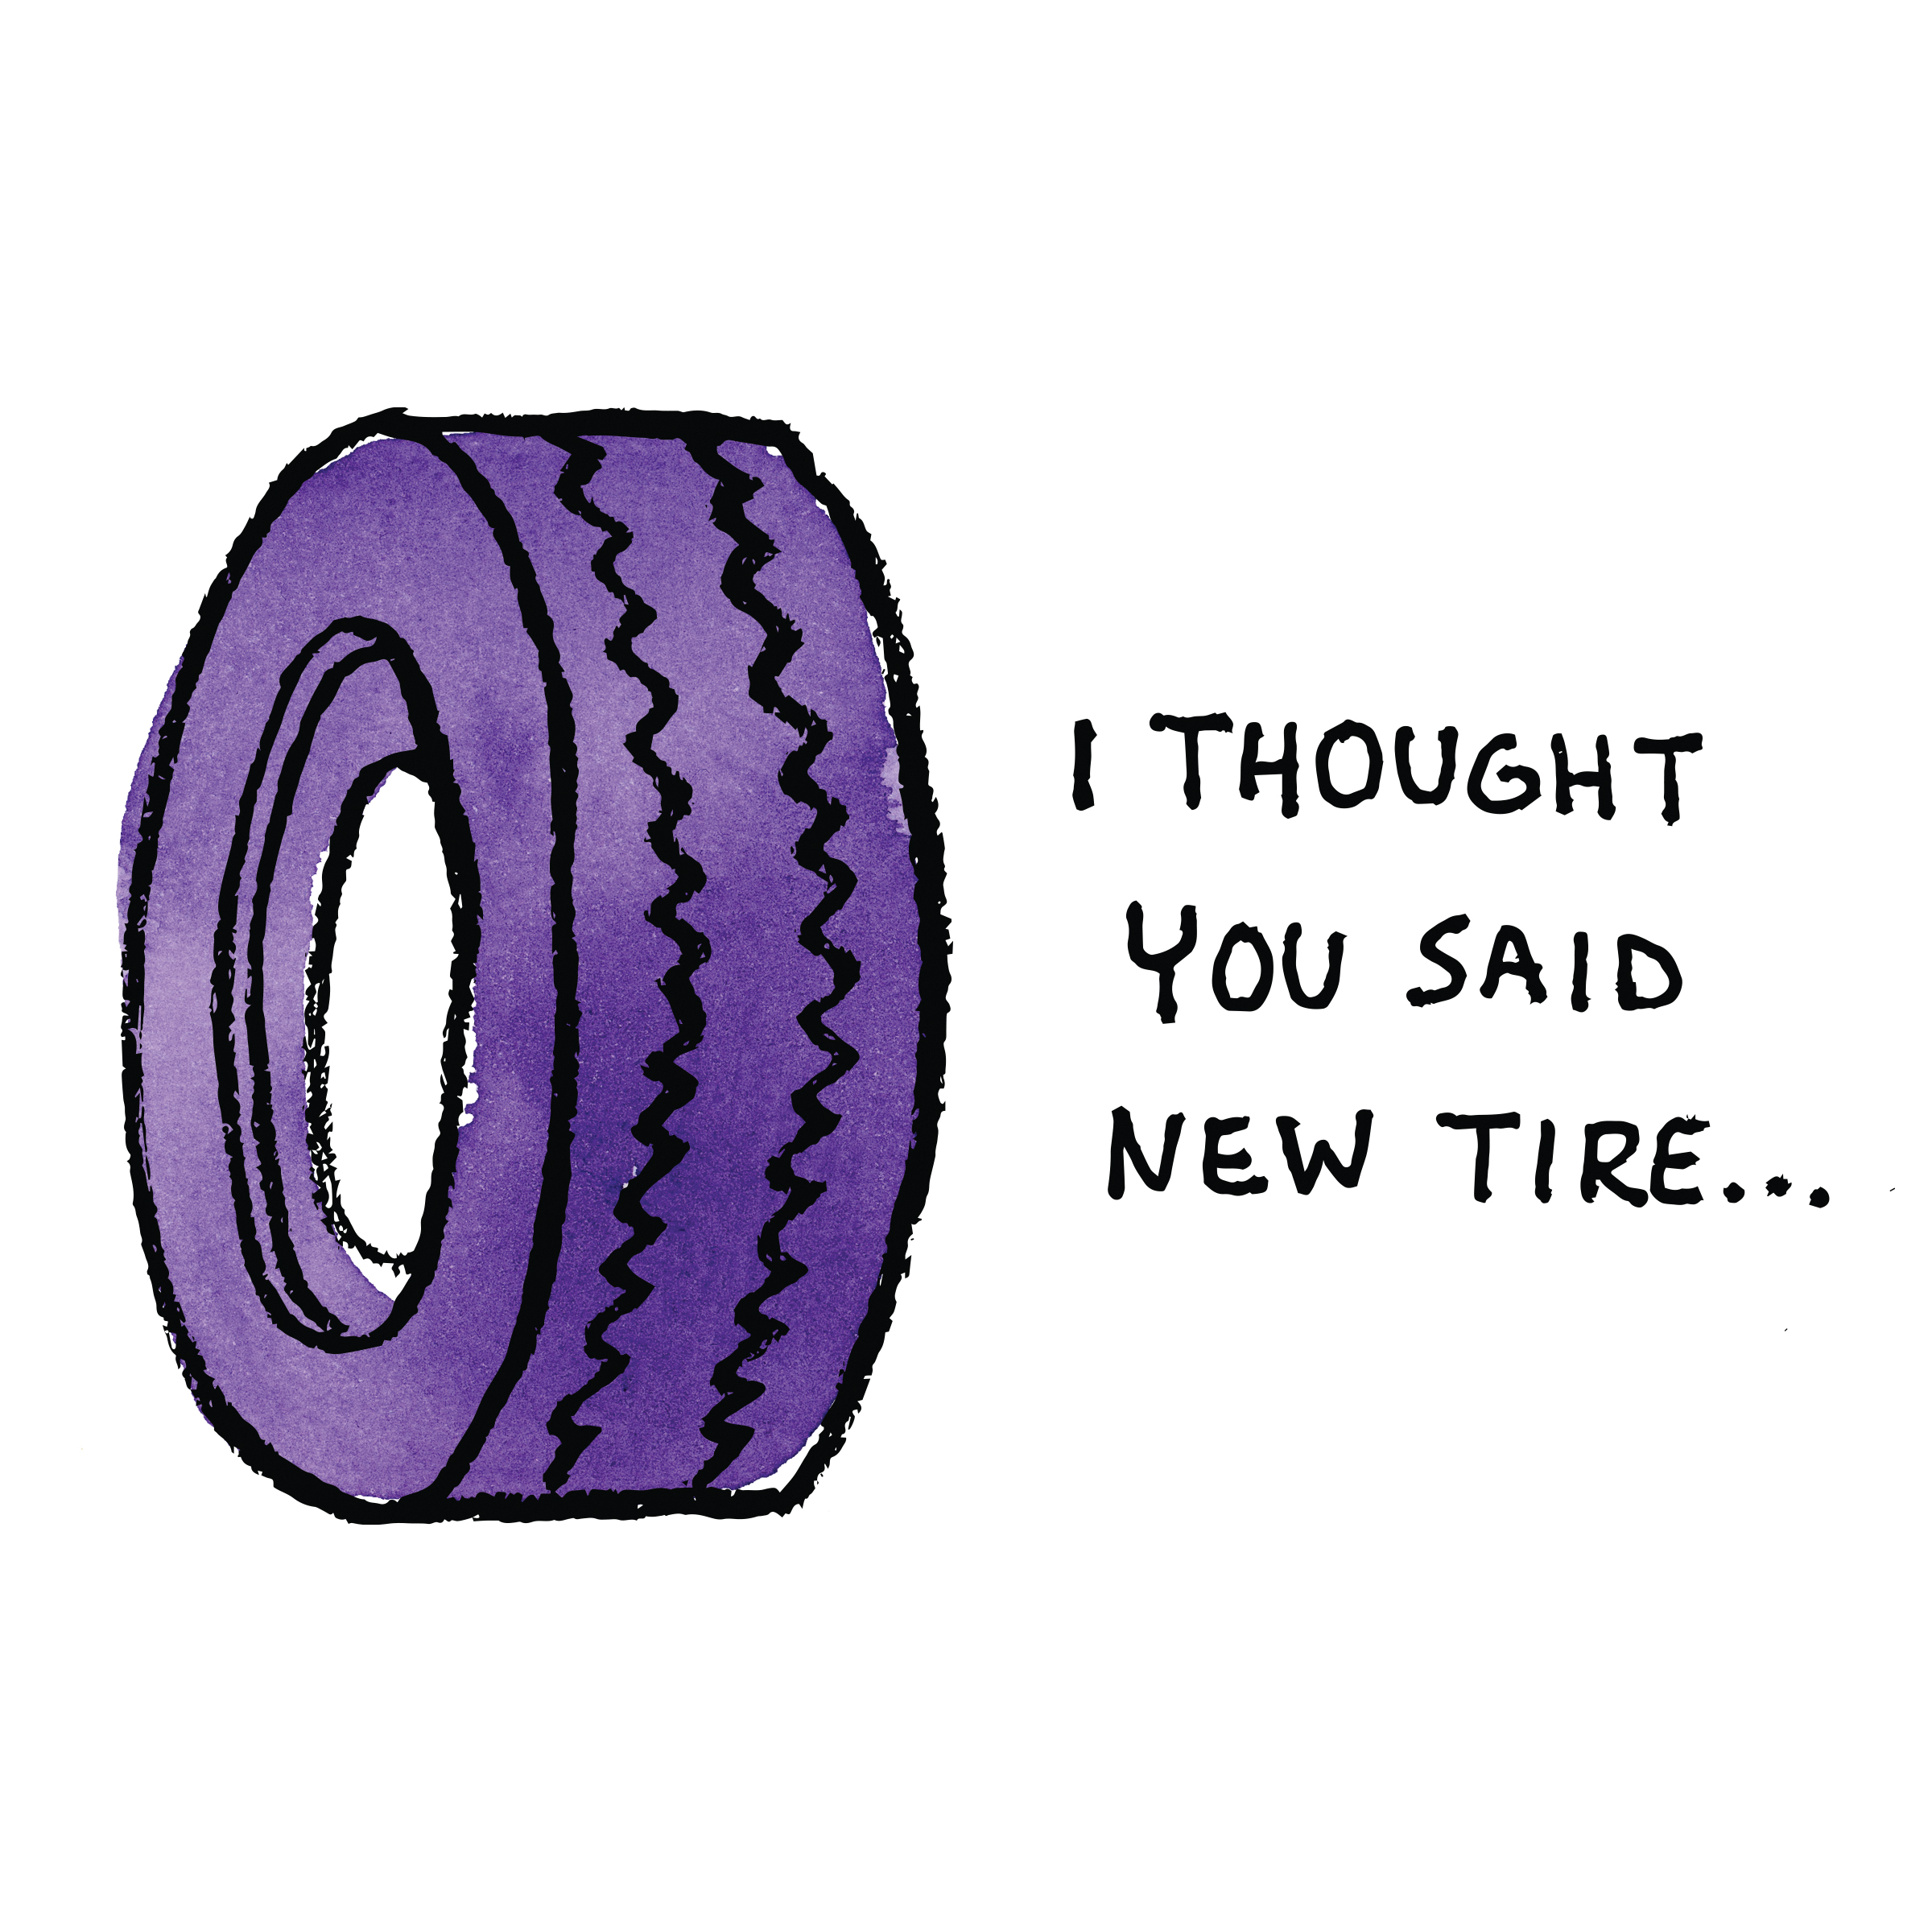 A tire saying i thought you said new tire...